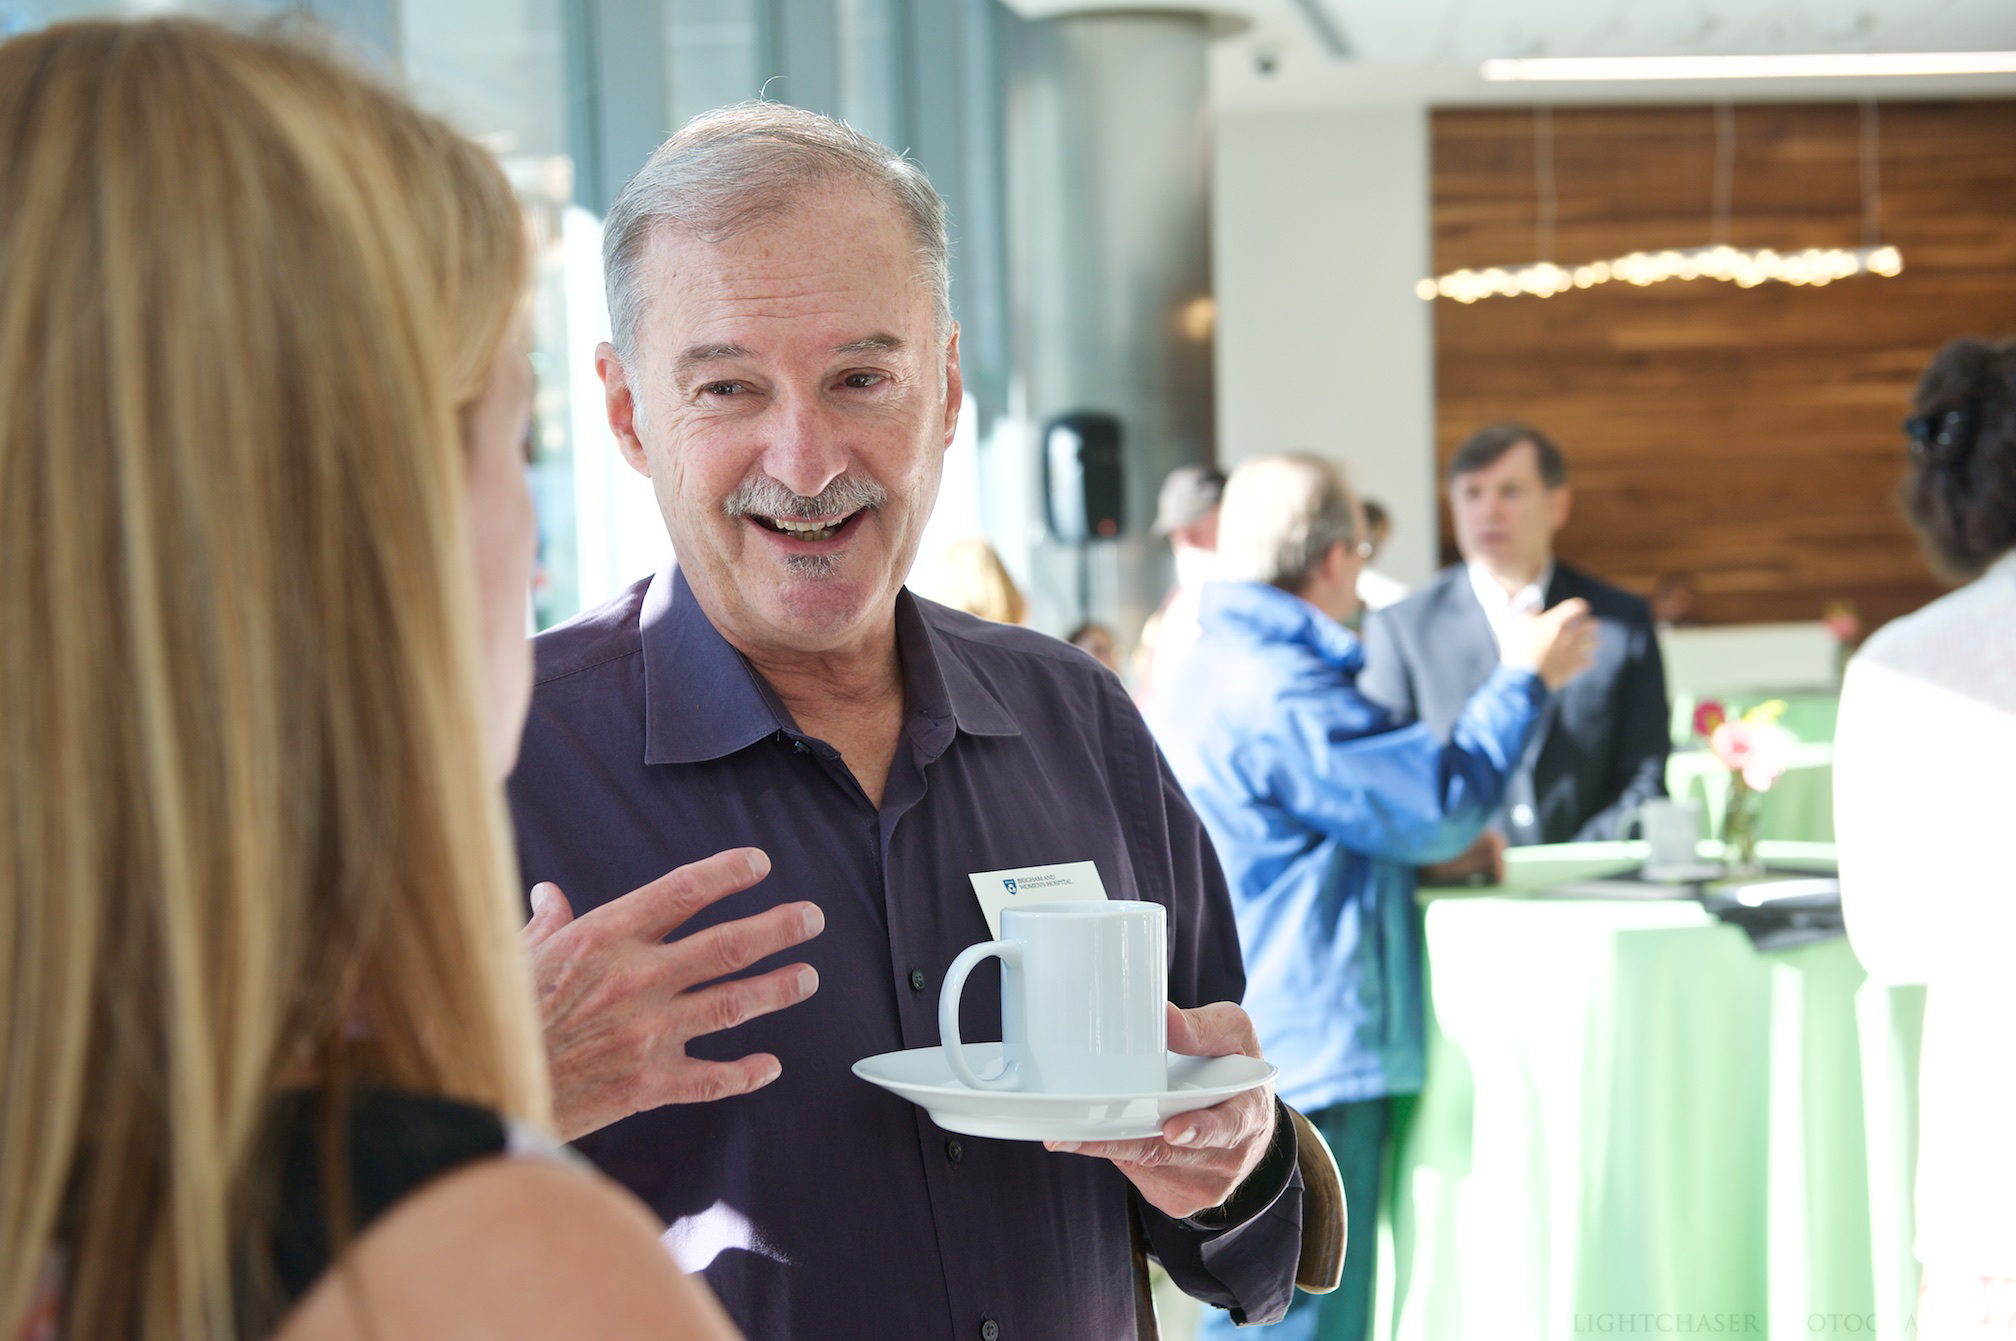 Local artist Tom Stocker, whose artwork is featured in the building, chats at the breakfast.